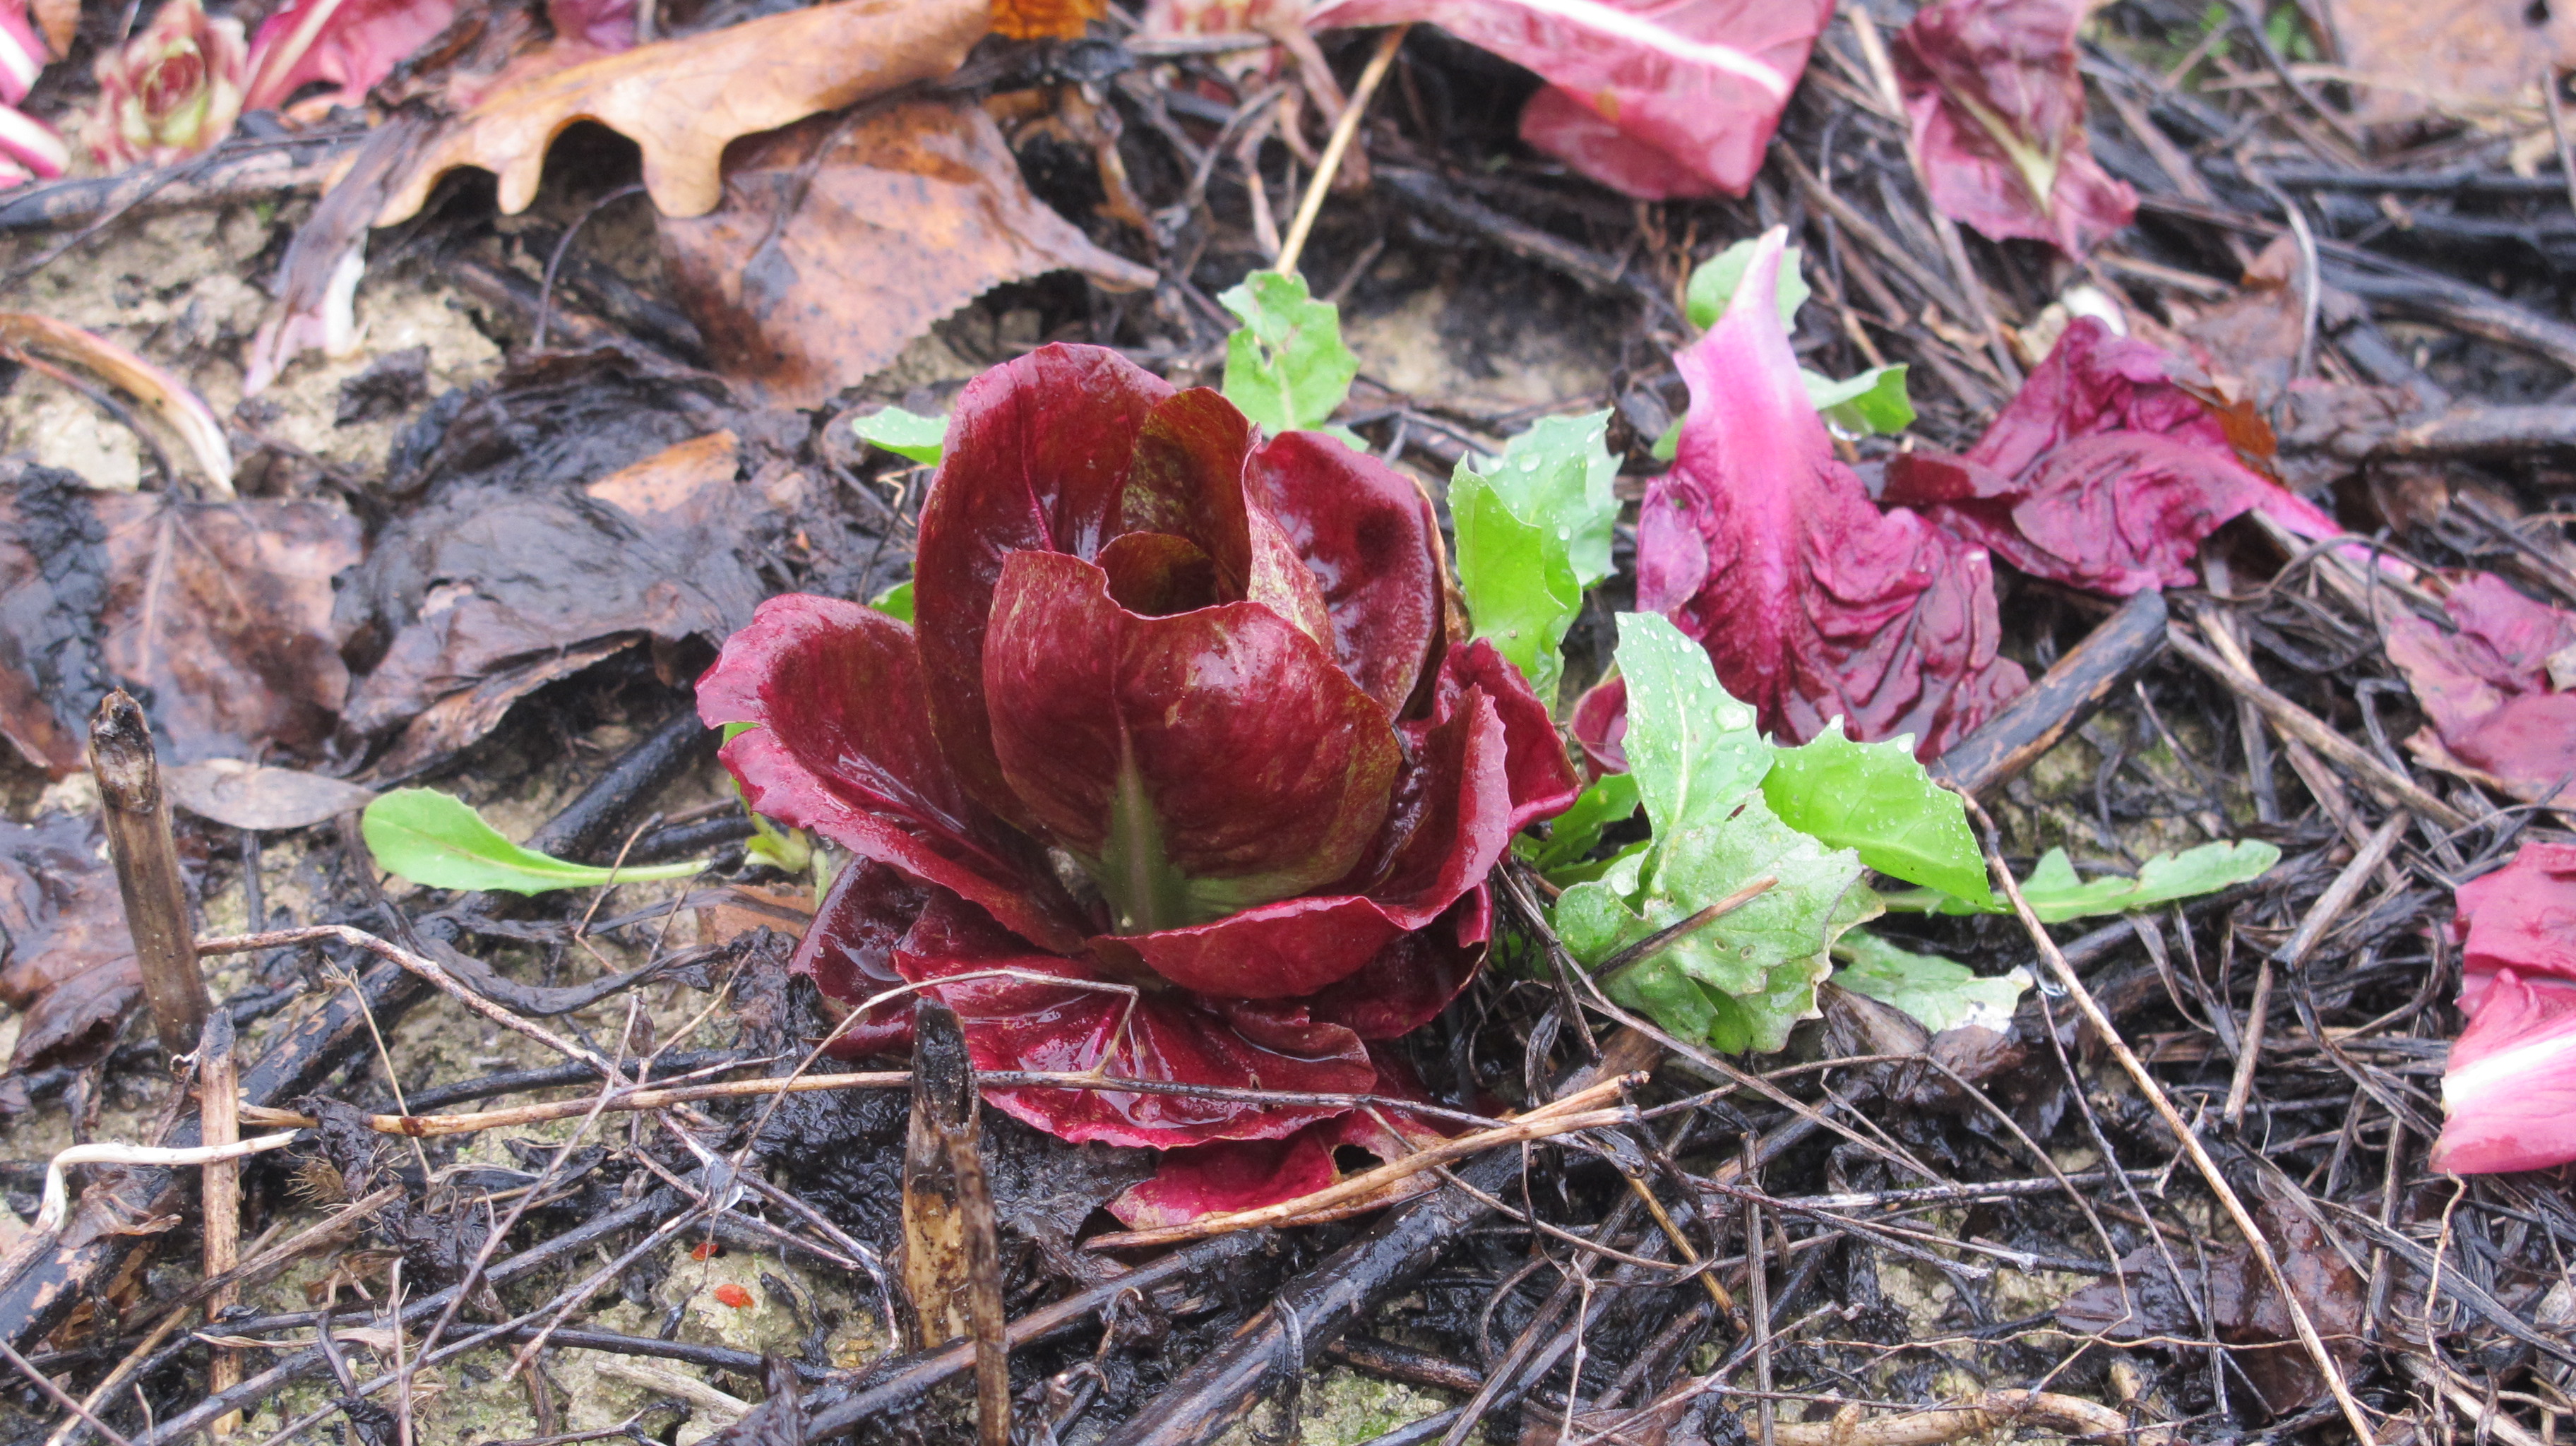 Radicchio pops out amongst fallen branches and deceased plants. 